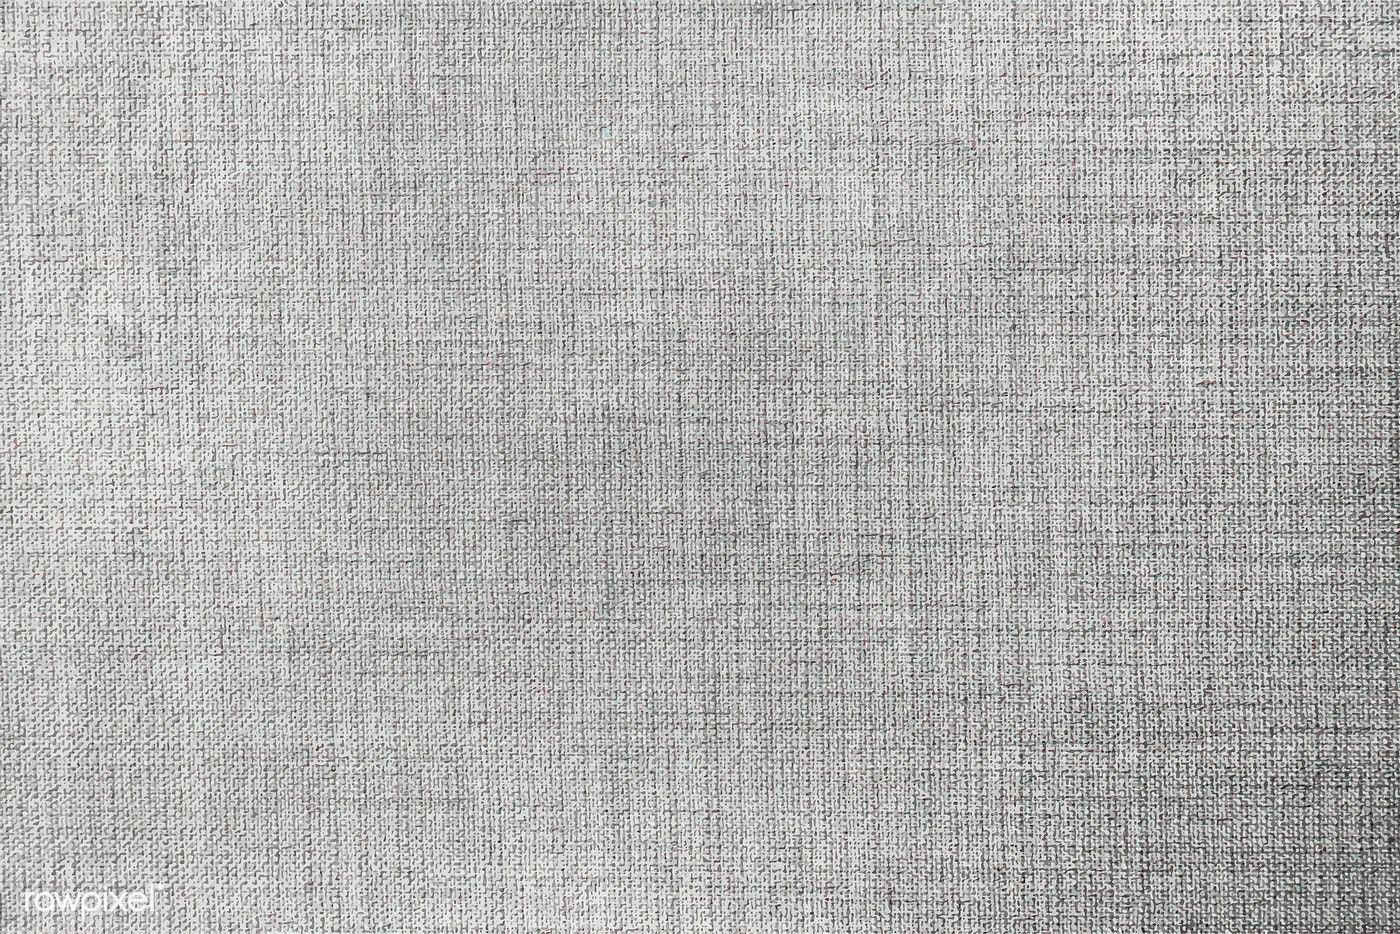 Gray Fabric Textile Textured Background Vector Image By